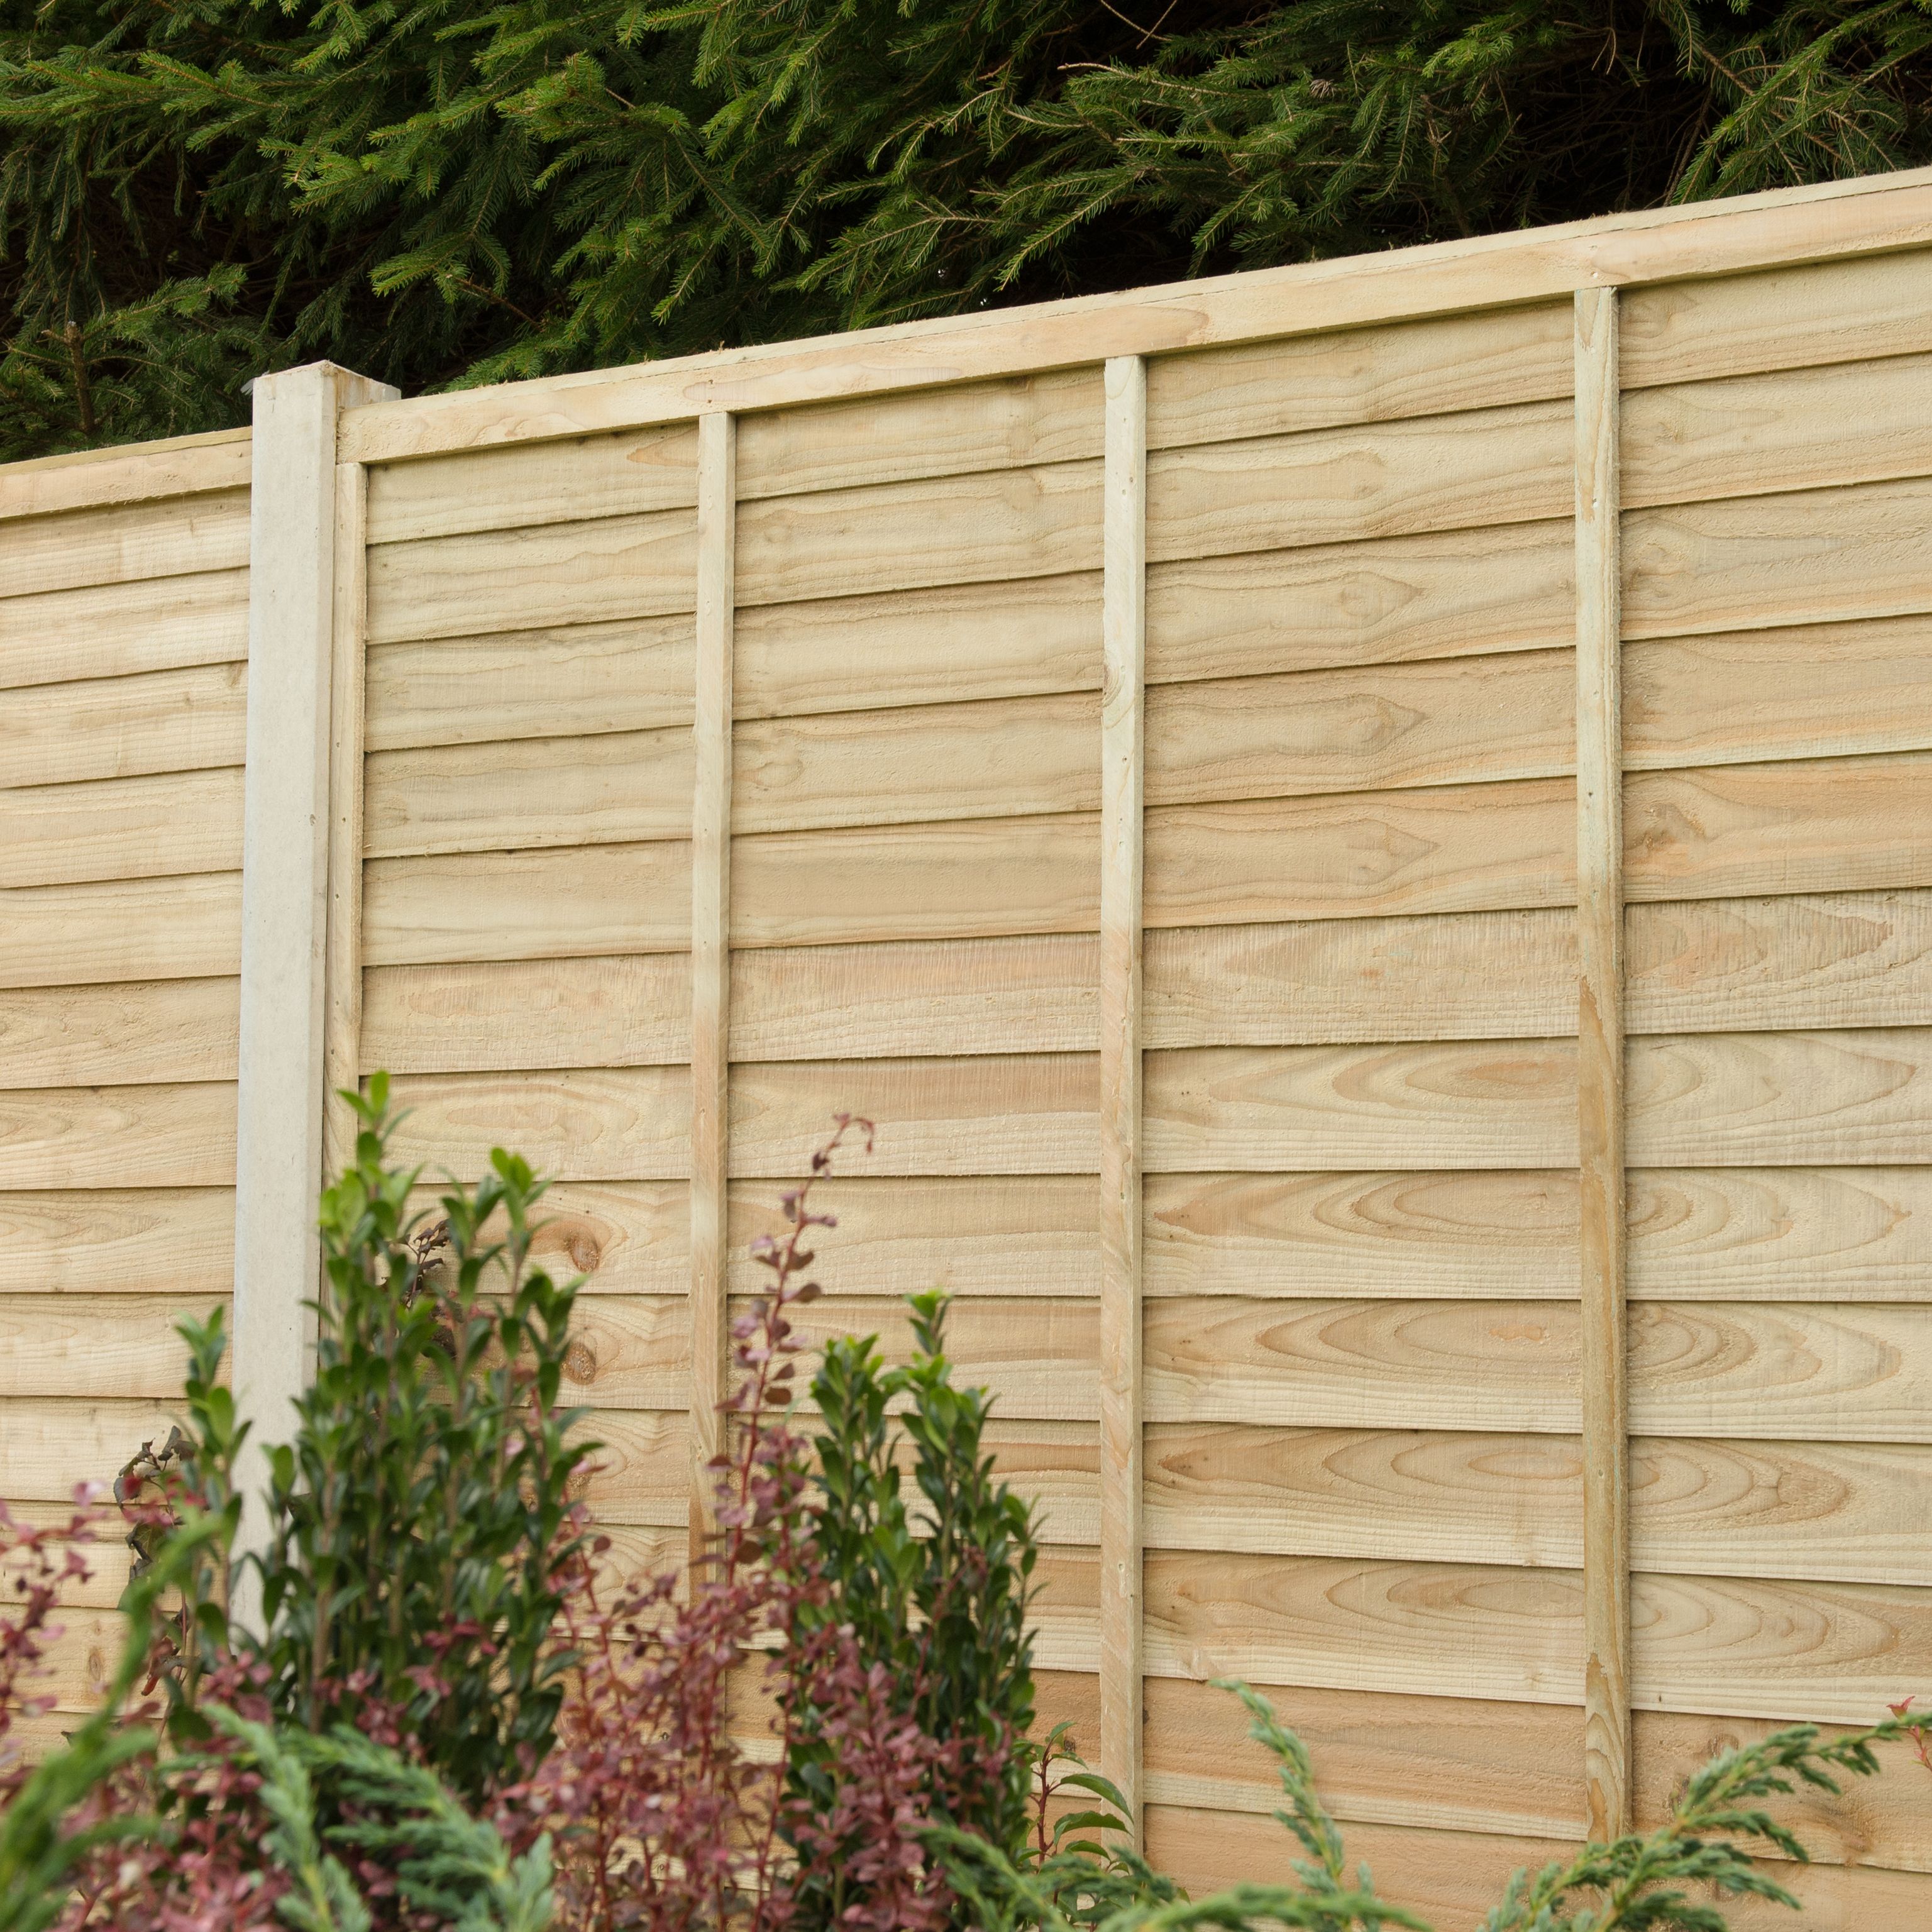 Premier Overlap Pressure treated 6ft Wooden Fence panel (W)1.83m (H)1.83m, Pack of 3